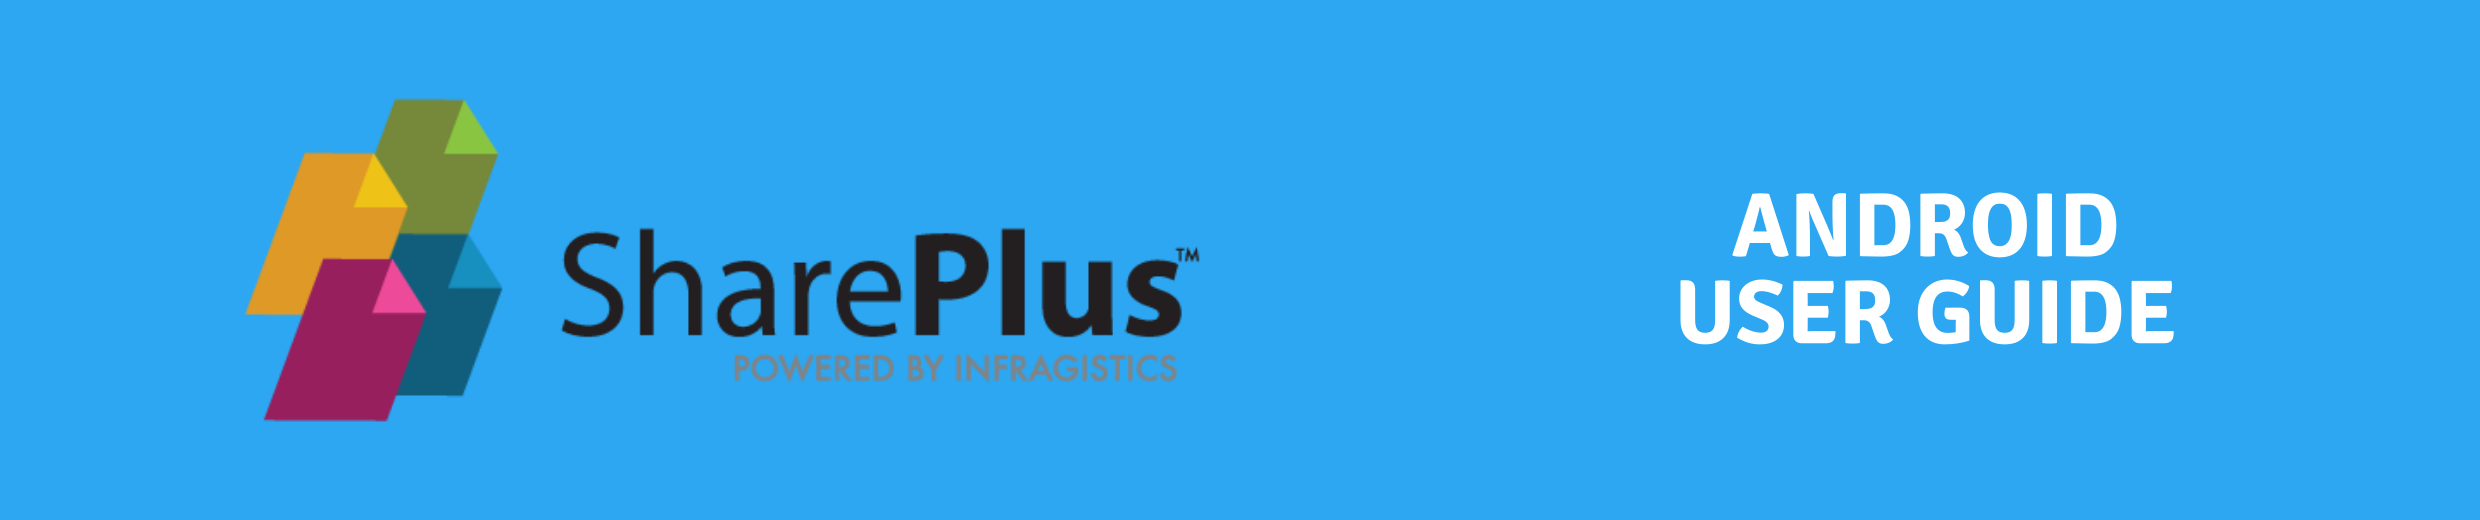 SharePlus Android User Guide